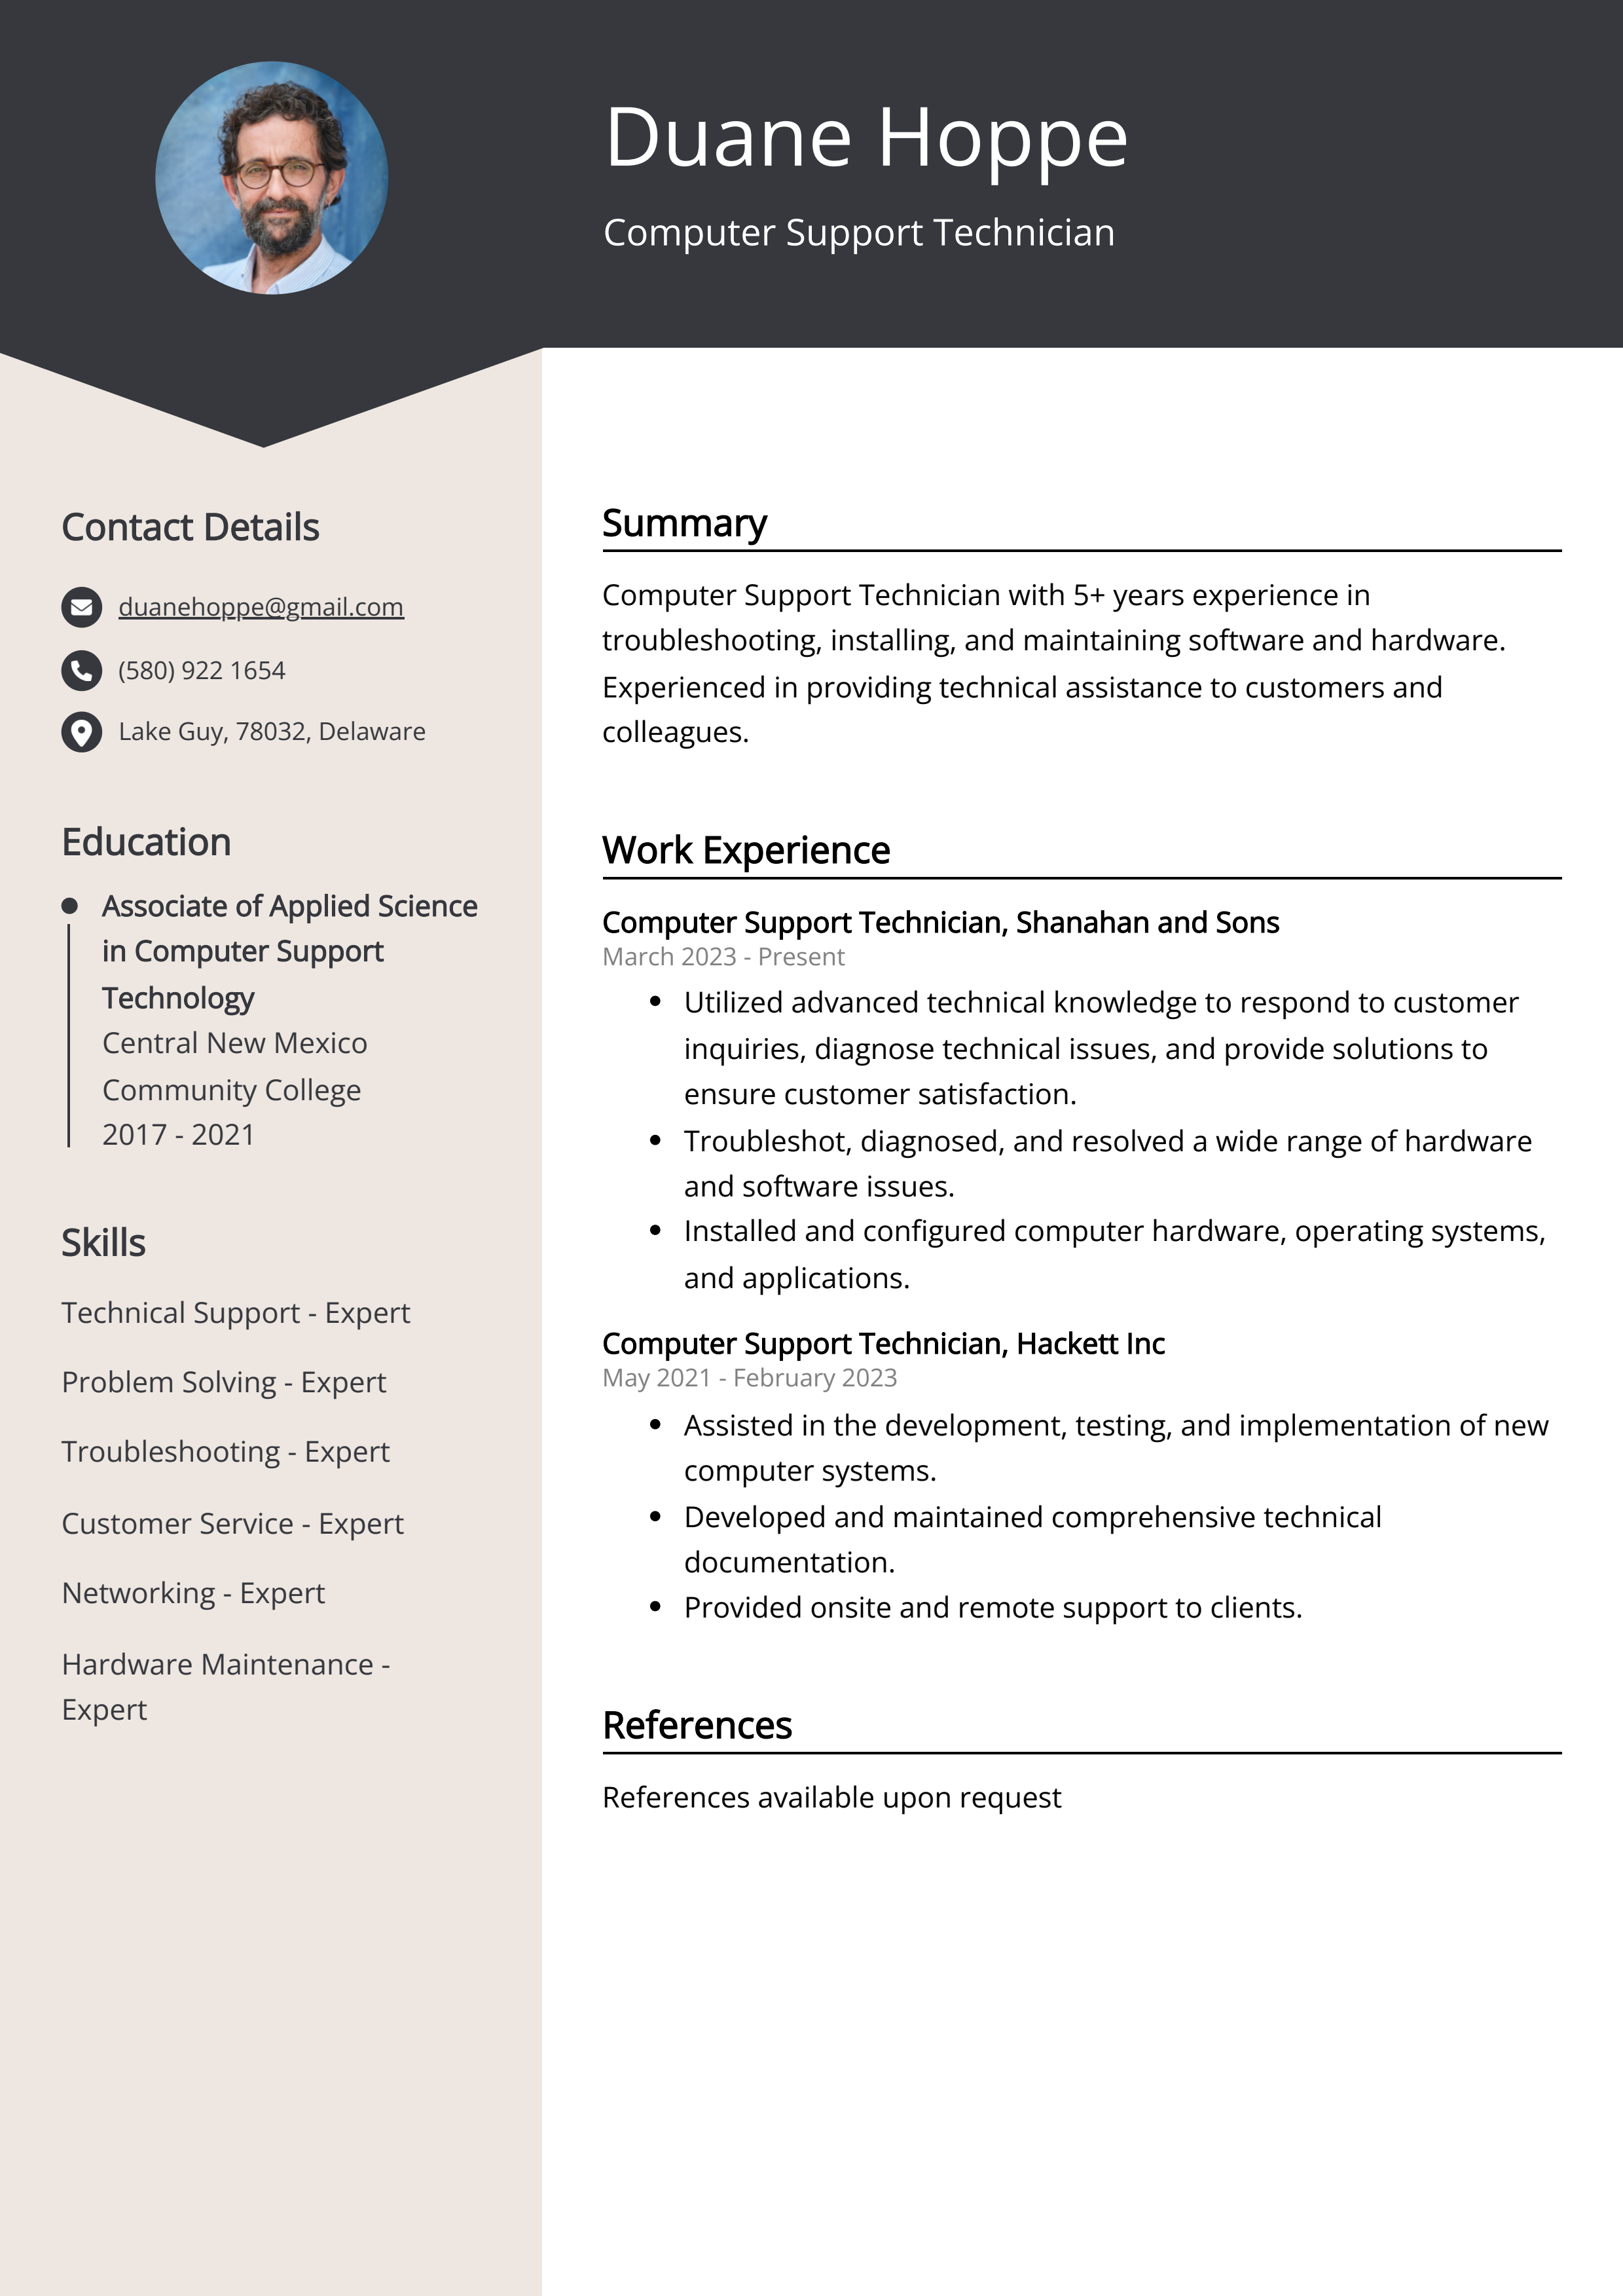 Computer Support Technician Resume Example